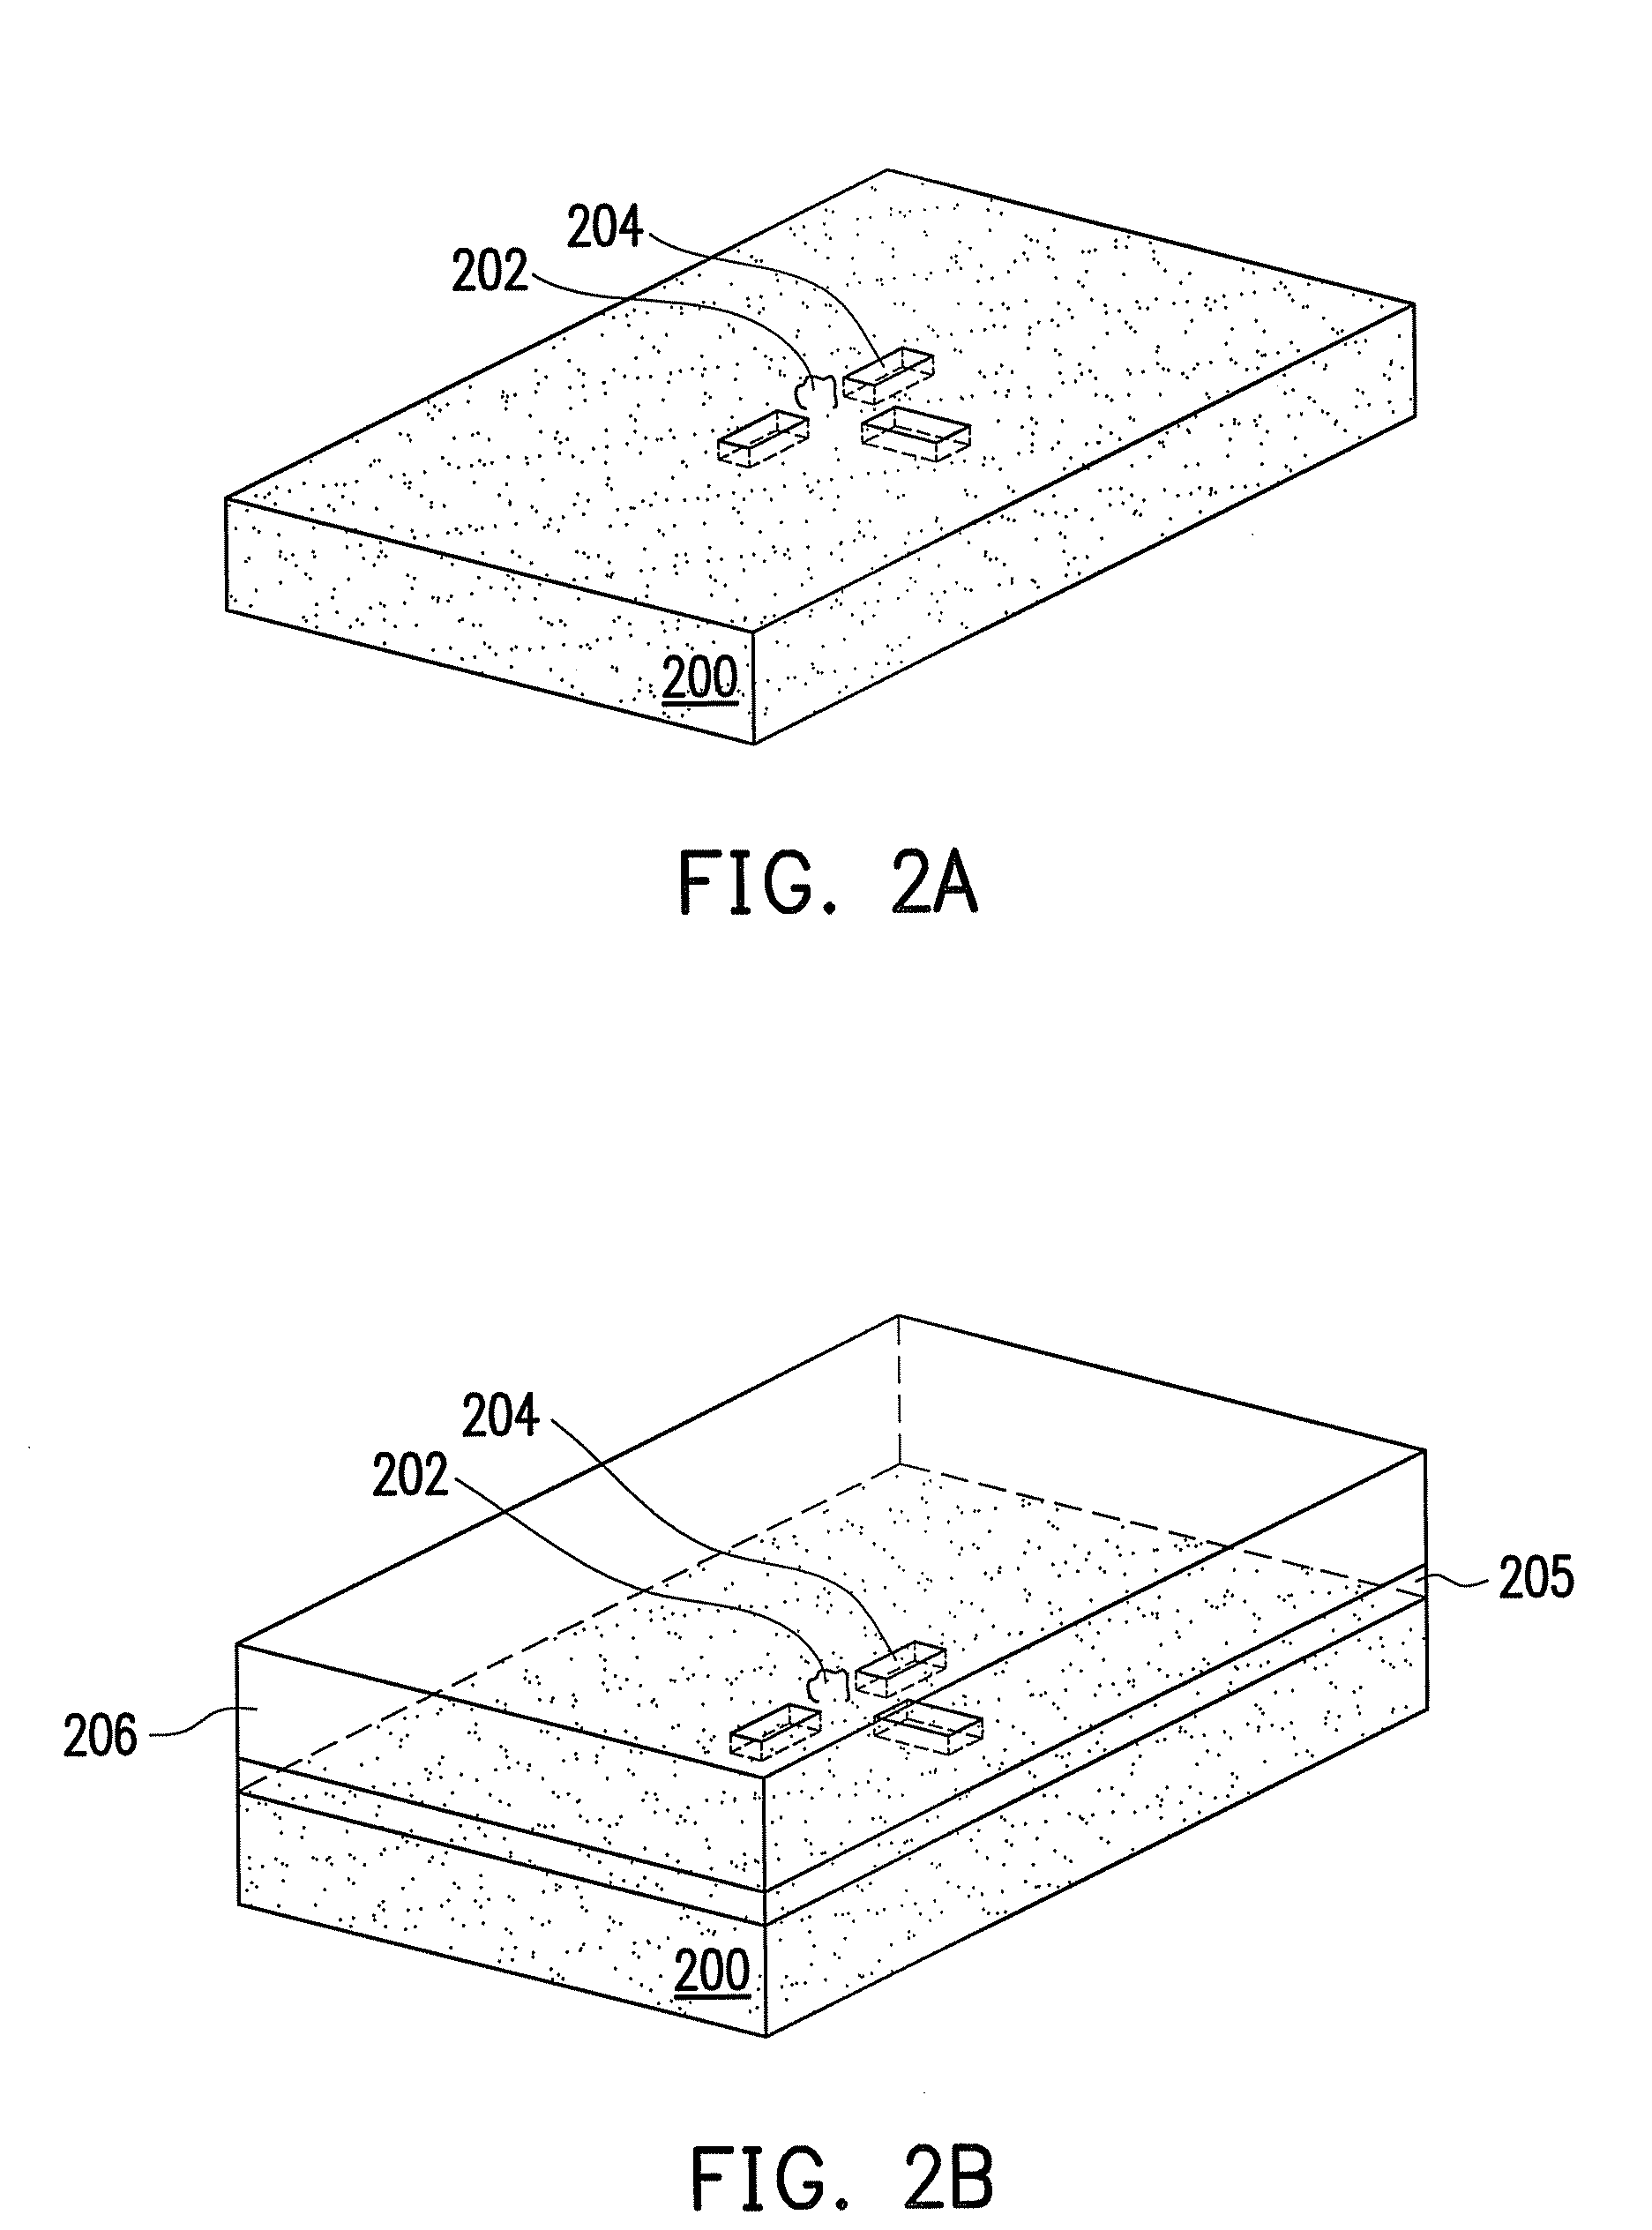 Method of fabricating sample membranes for transmission electron microscopy analysis